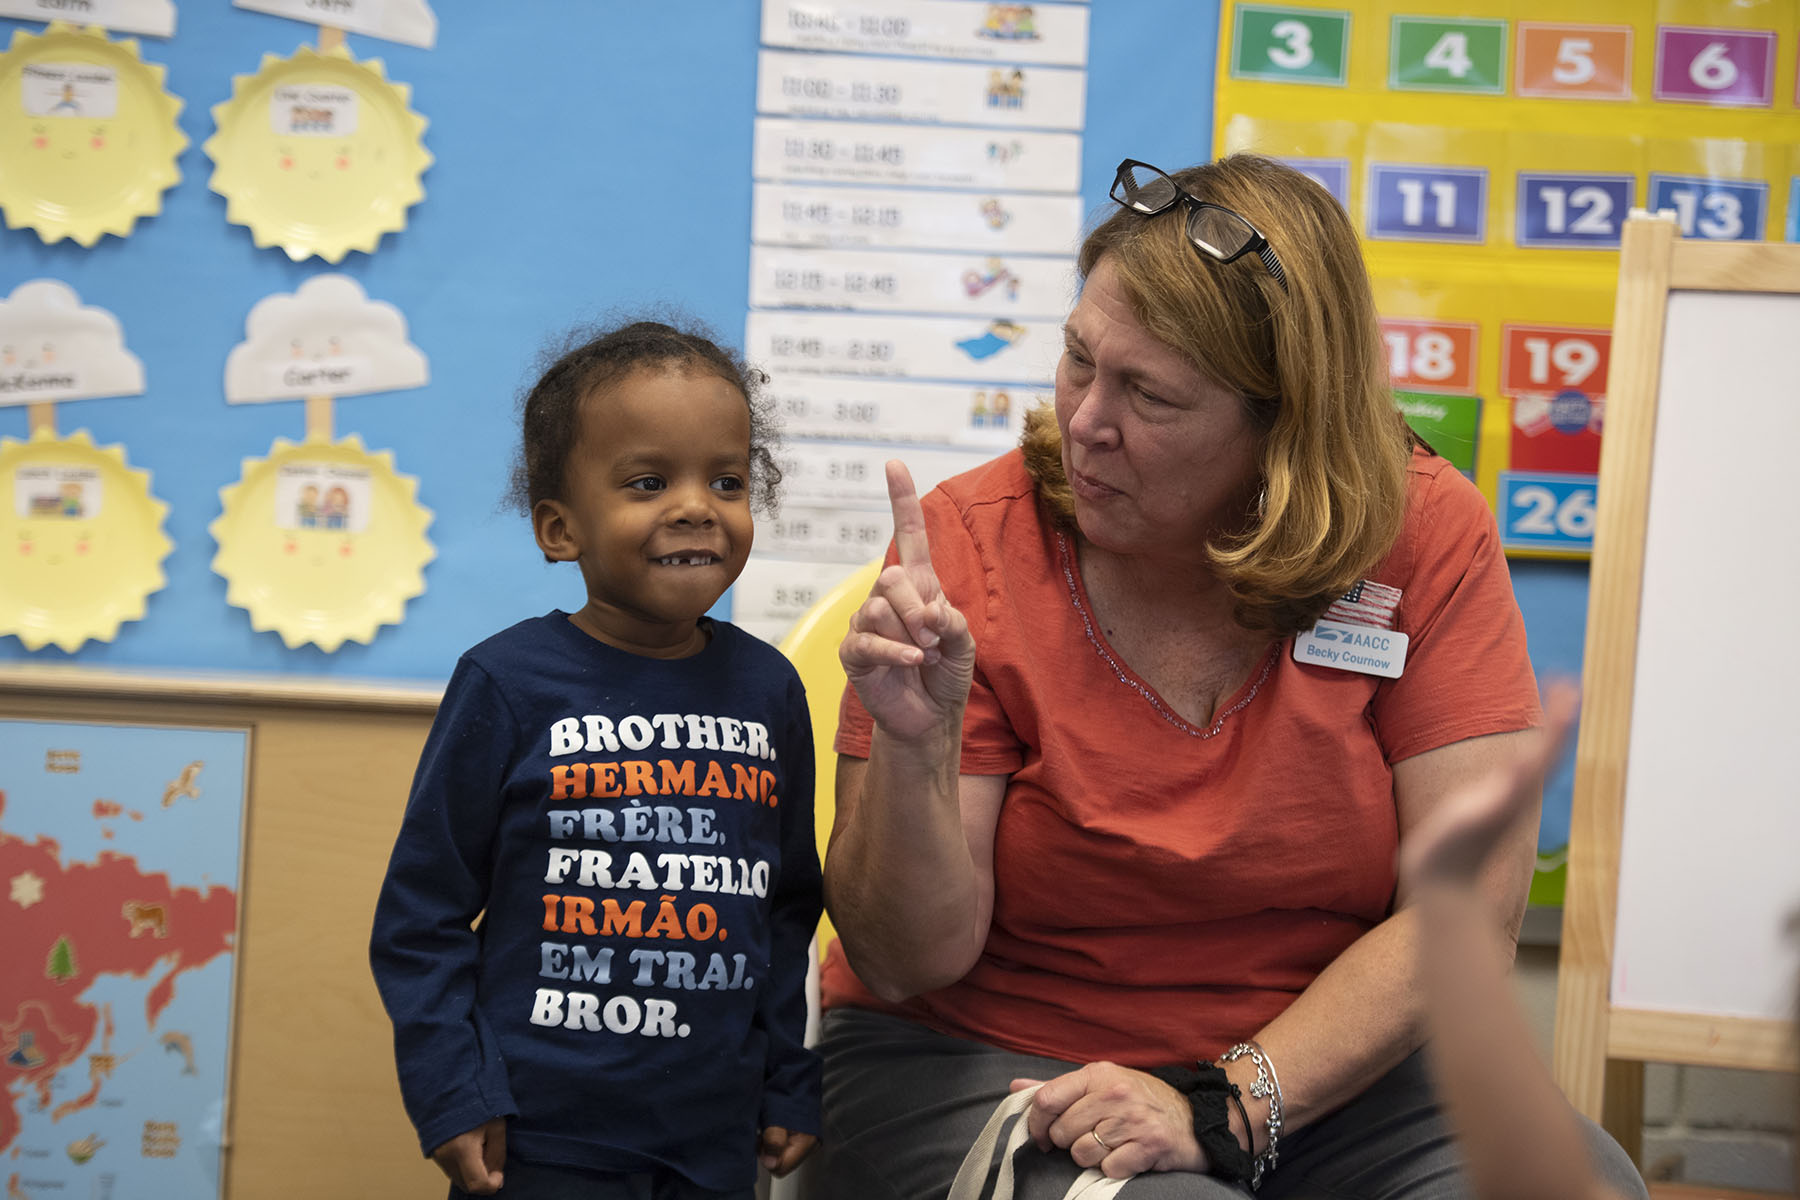 A young child and his teacher are seen at a child care center.